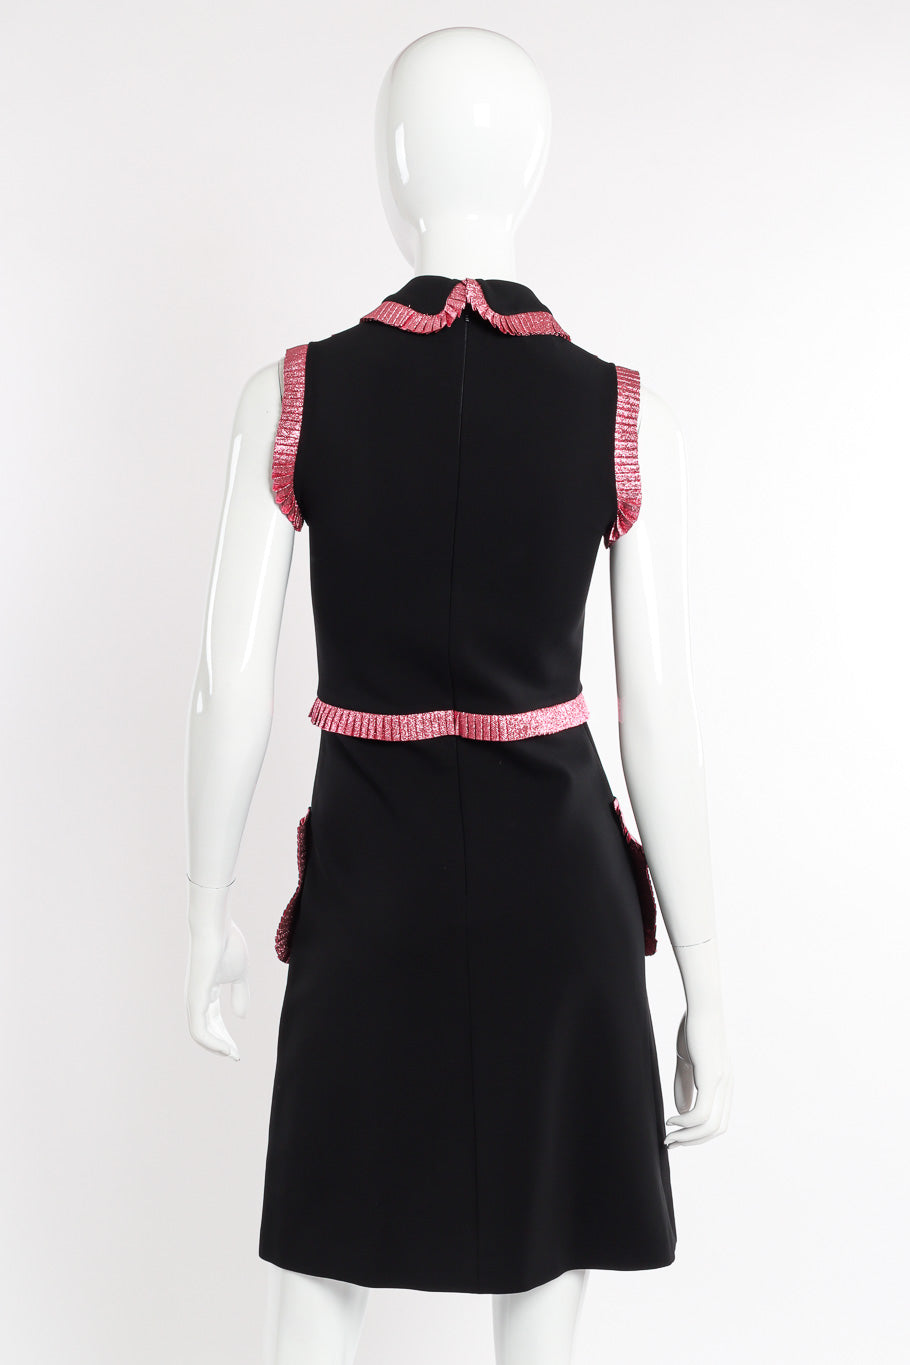 Gucci Pleated Trim Sleeveless Dress back view on mannequin @recessla